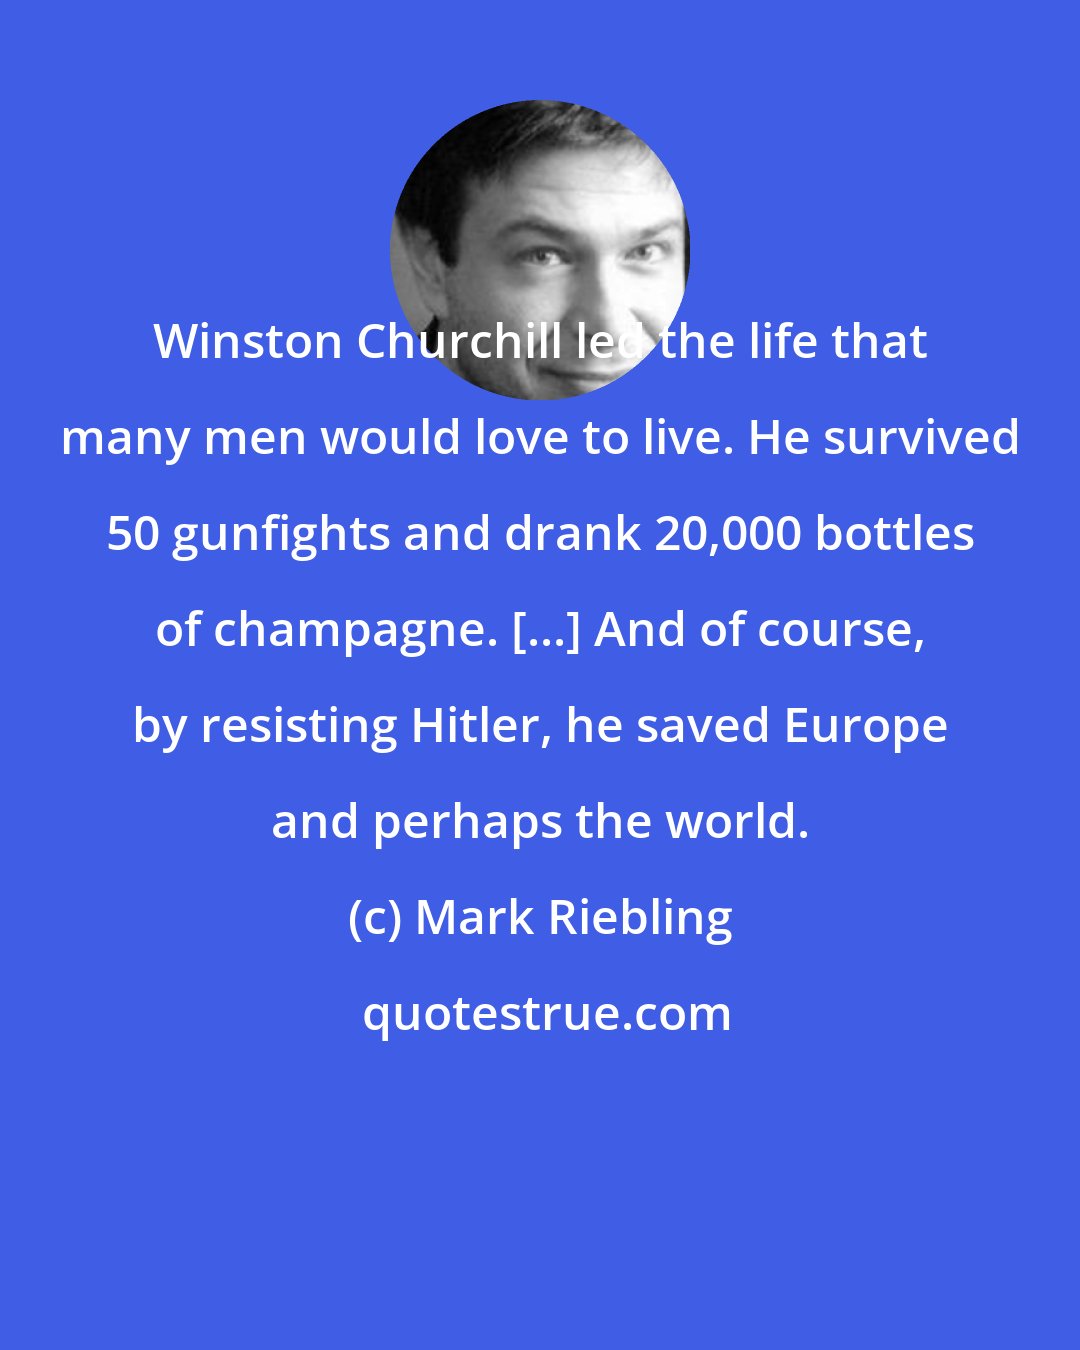 Mark Riebling: Winston Churchill led the life that many men would love to live. He survived 50 gunfights and drank 20,000 bottles of champagne. [...] And of course, by resisting Hitler, he saved Europe and perhaps the world.